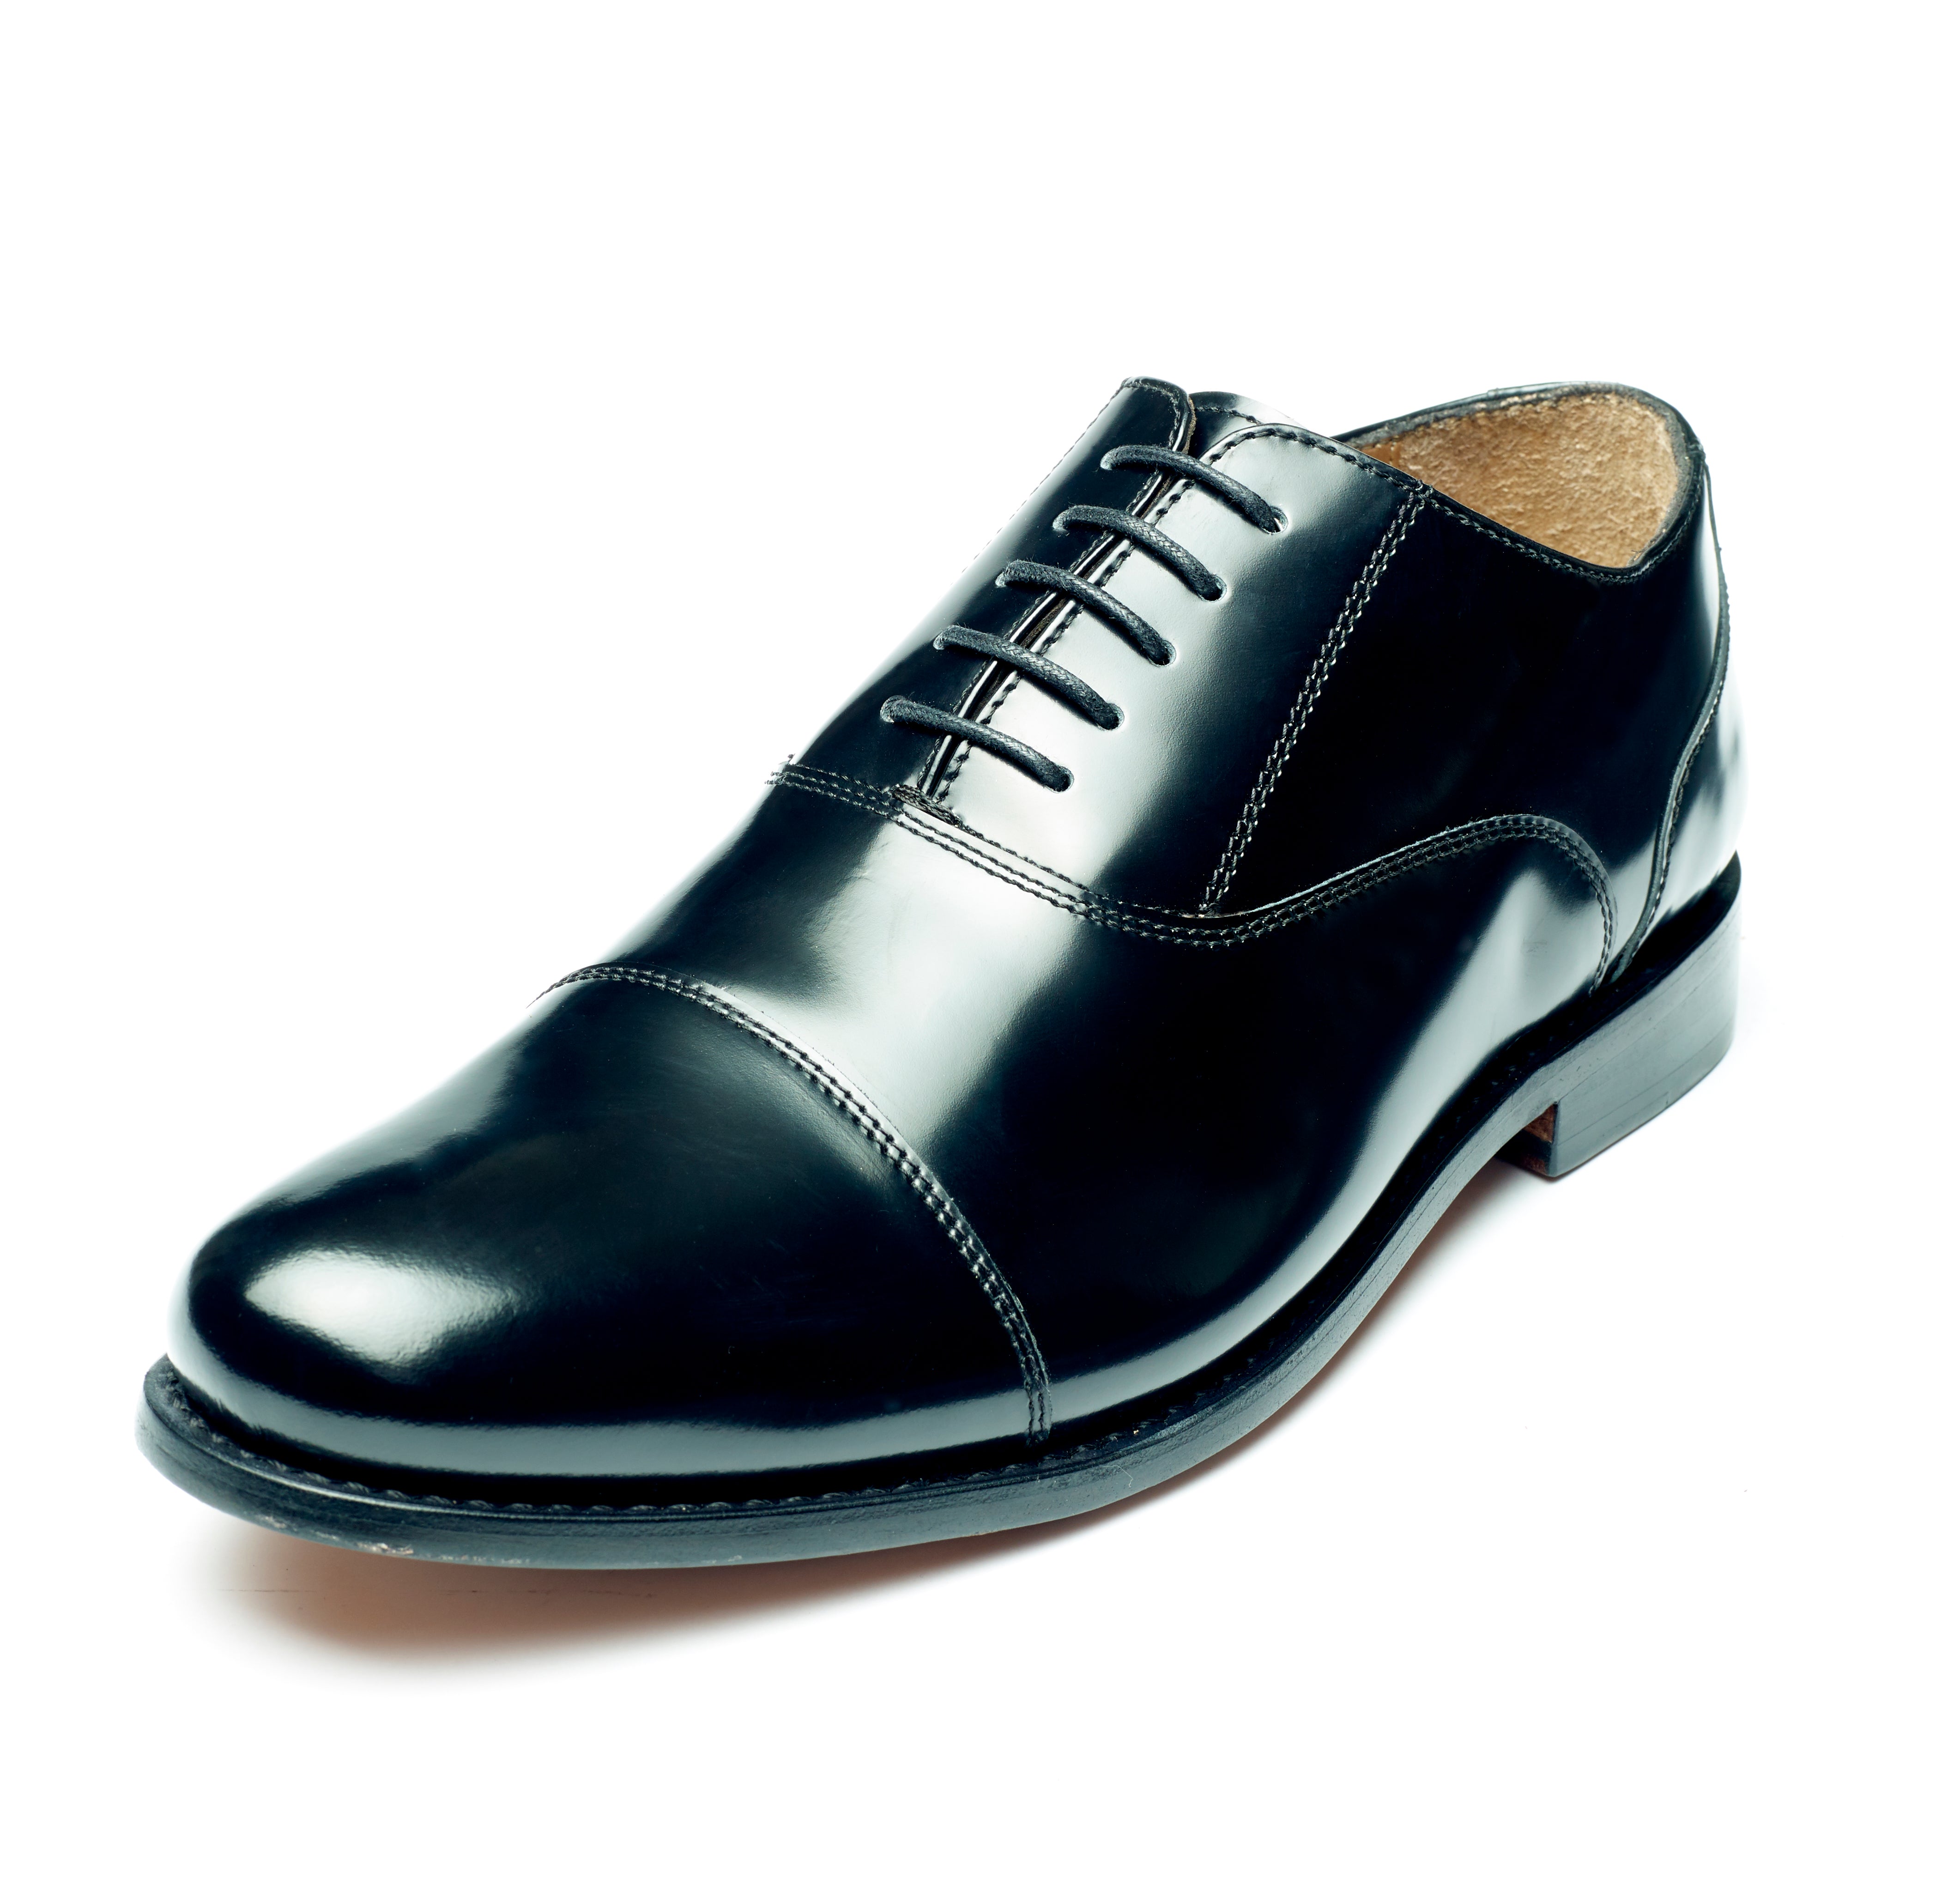 patent leather oxford shoes mens